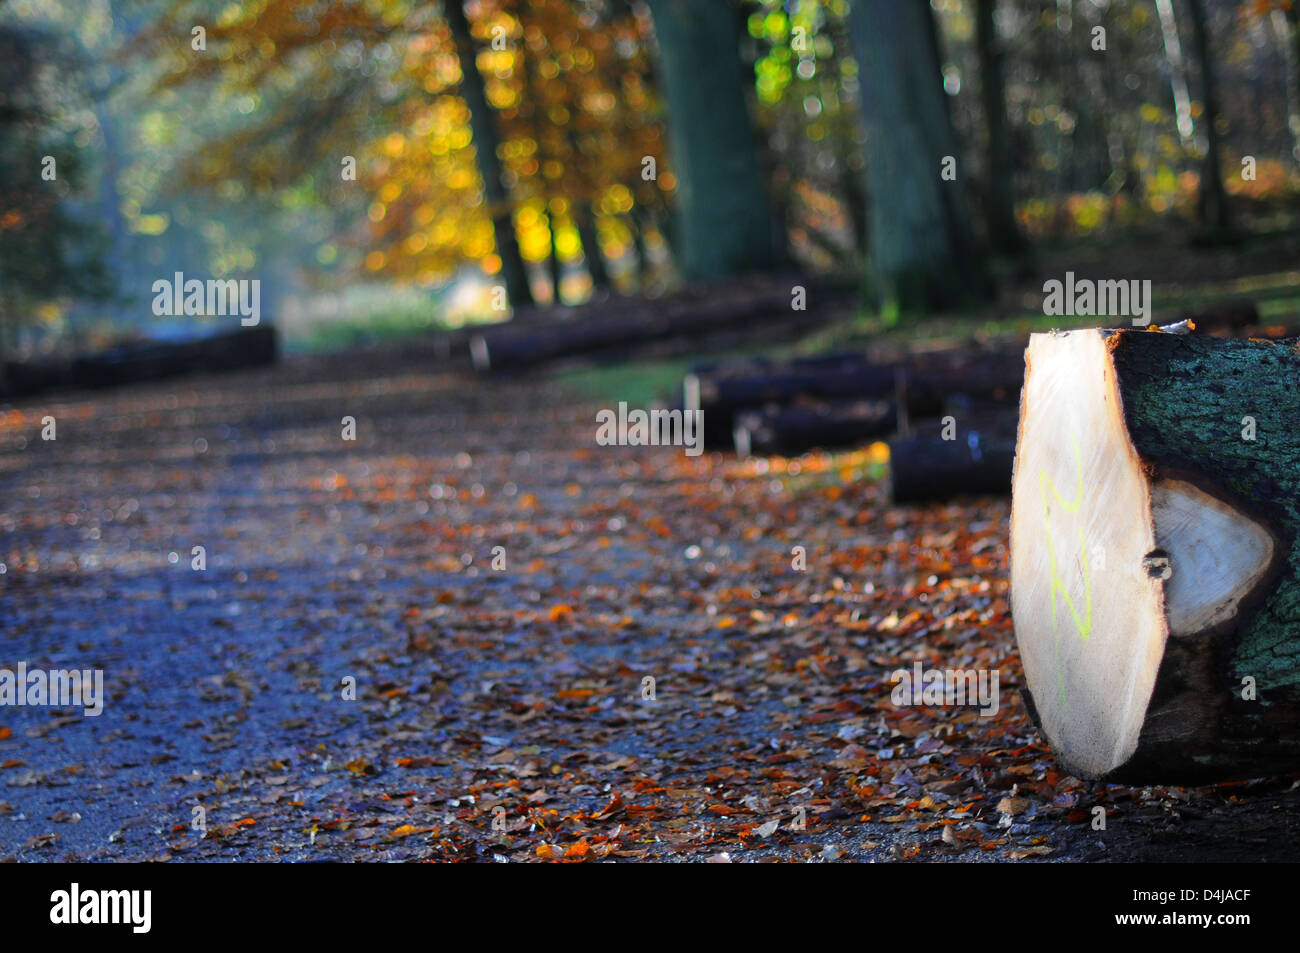 A timber stacking/logging area in Ashridge Forest, England. Stock Photo